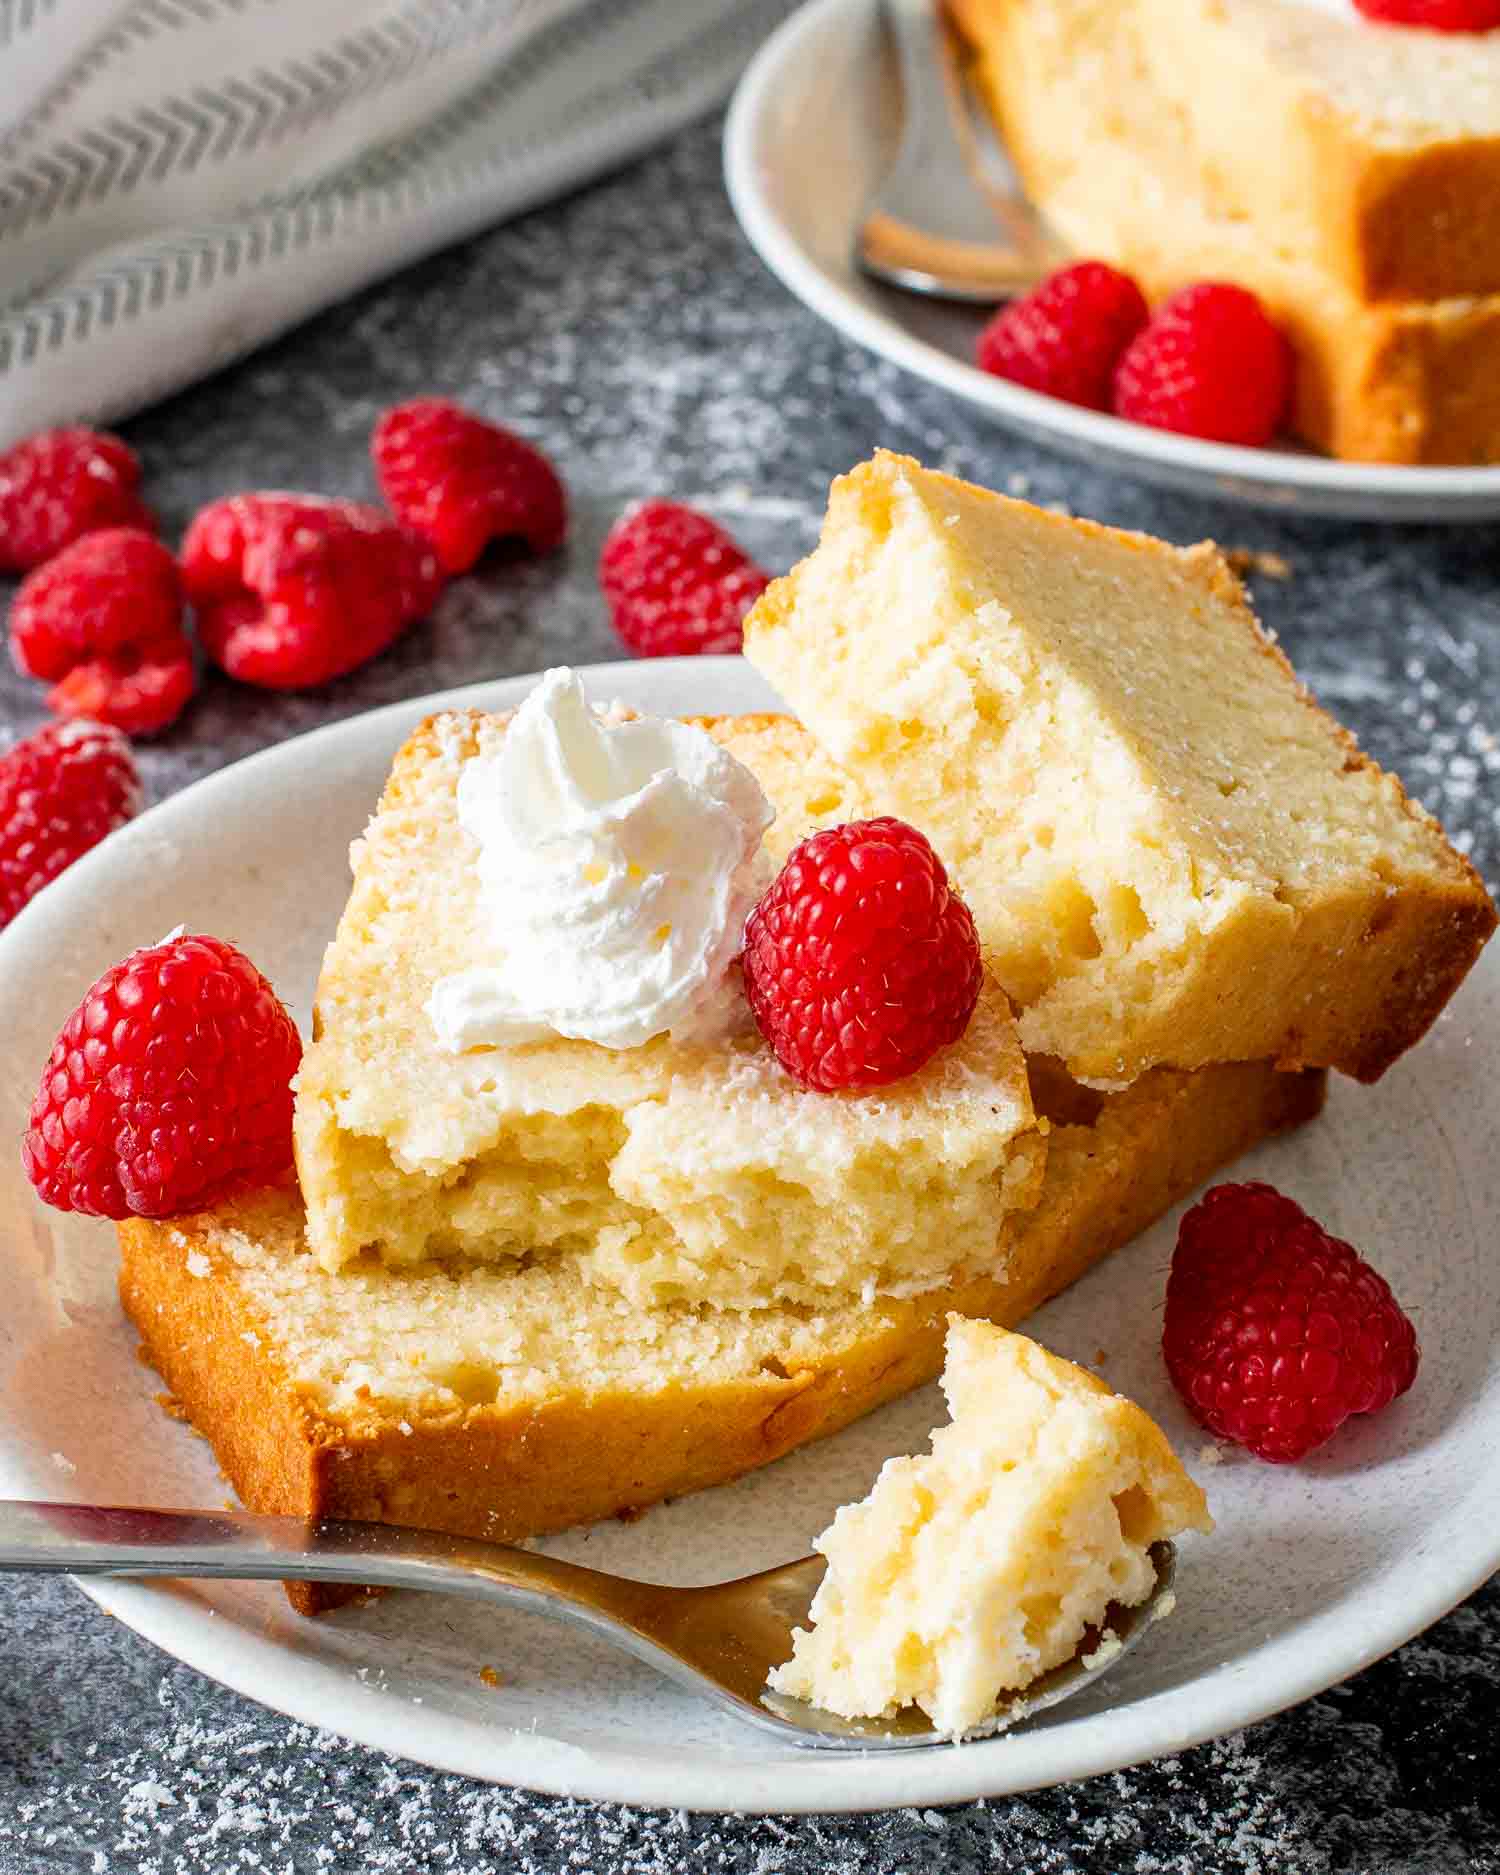 a couple slices of condensed milk pound cake on a dessert plate garnished with raspberries.